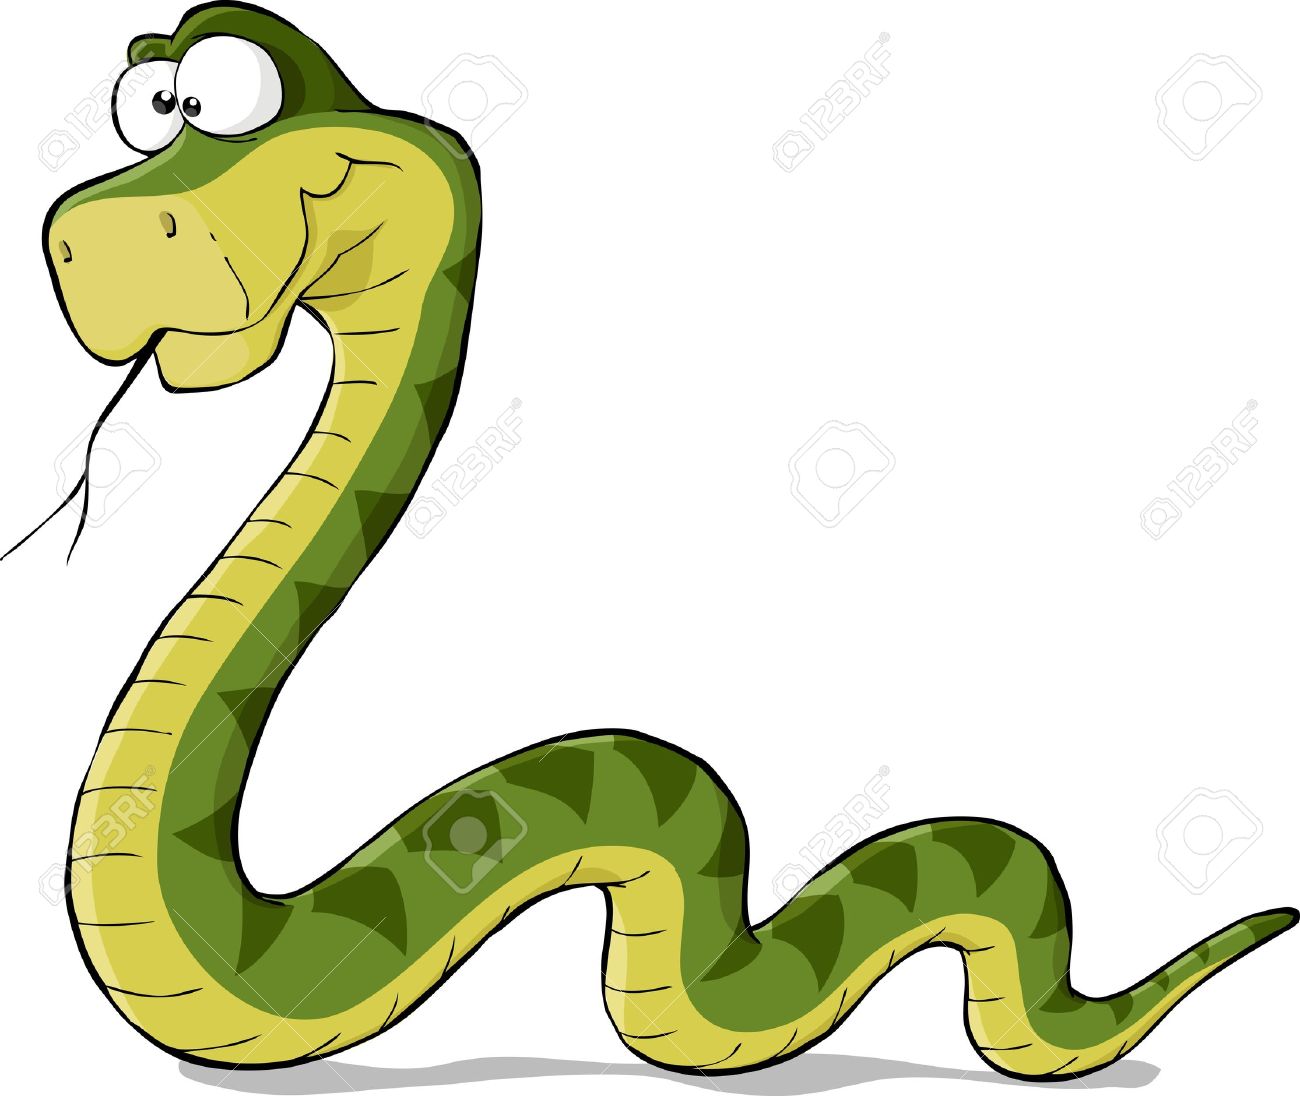 Serpent clipart #12, Download drawings